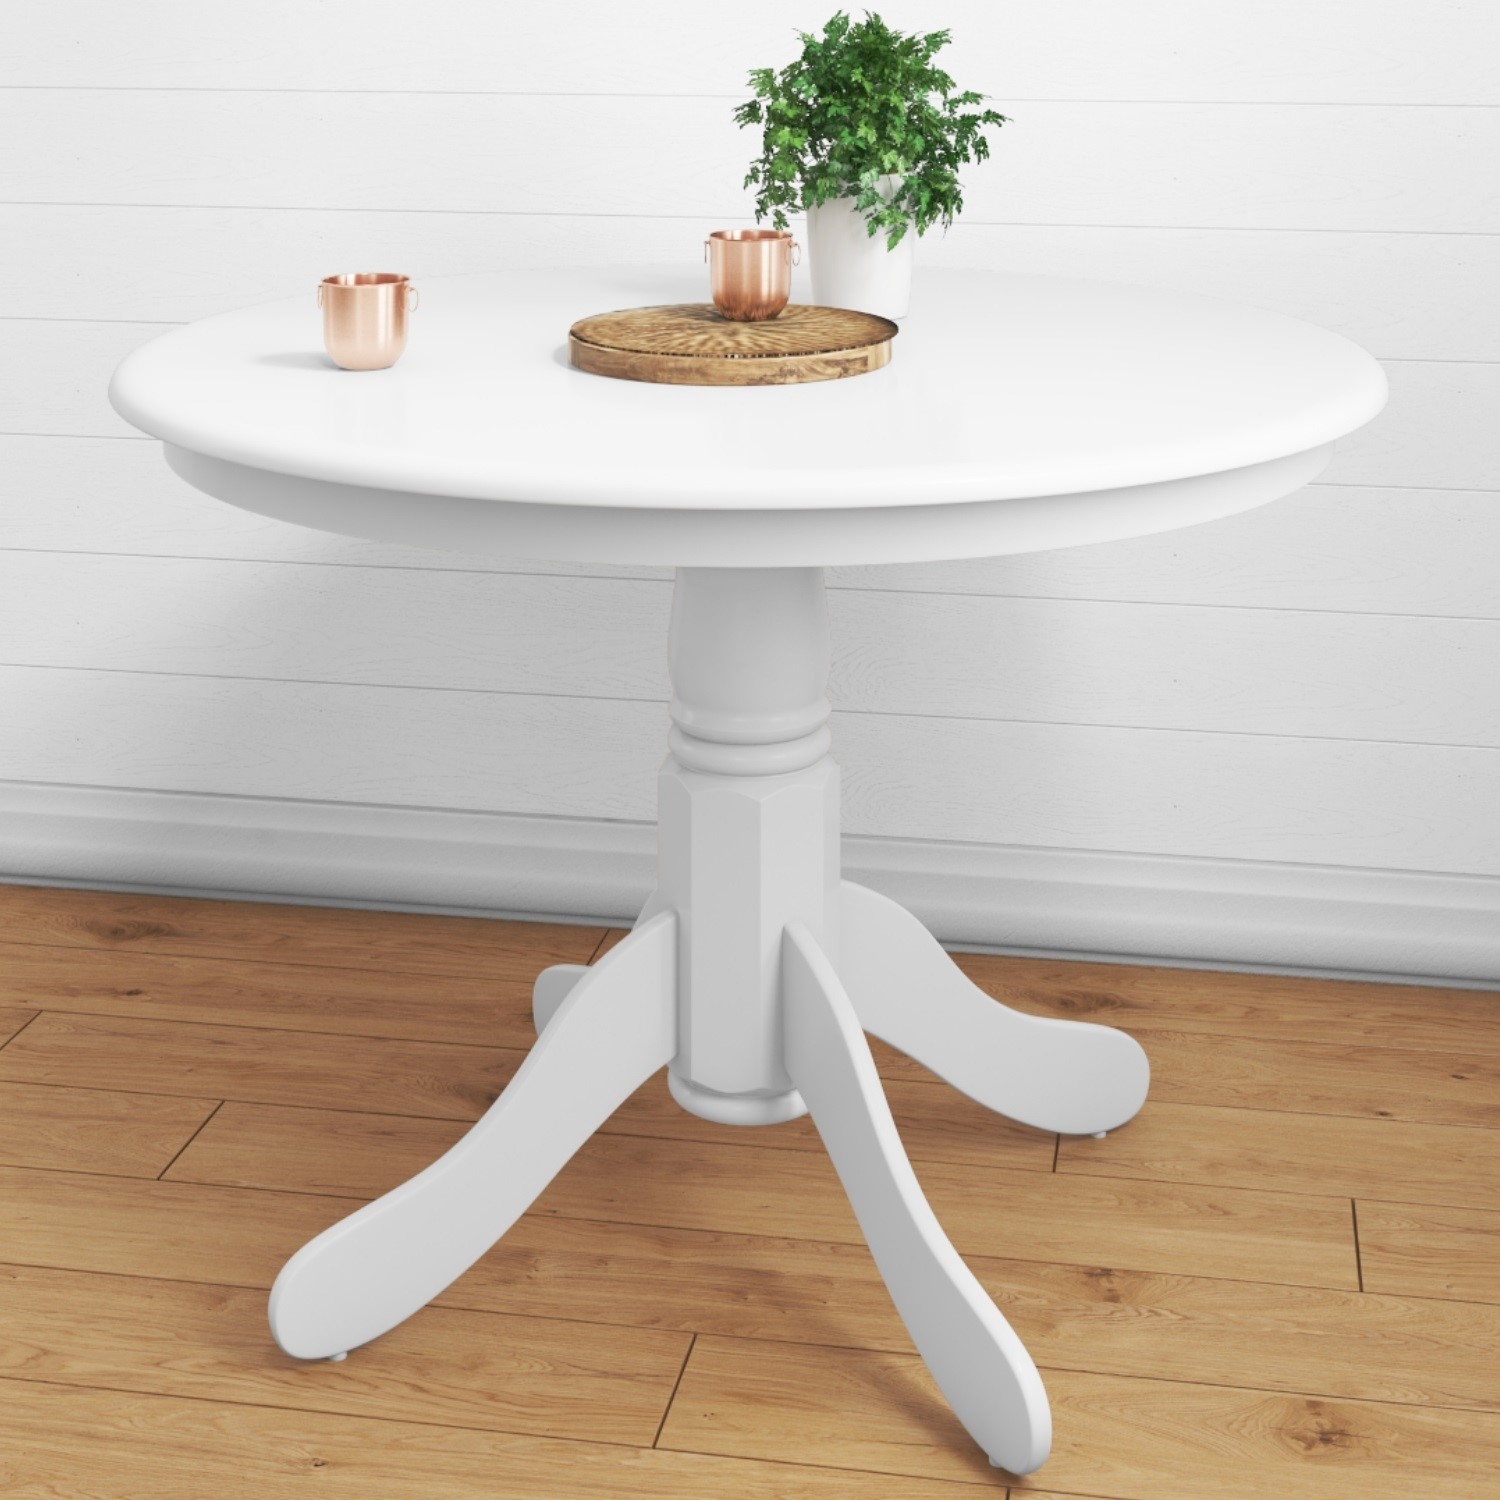 Small Round Dining Table In White Seats 4 Rhode Island Furniture123